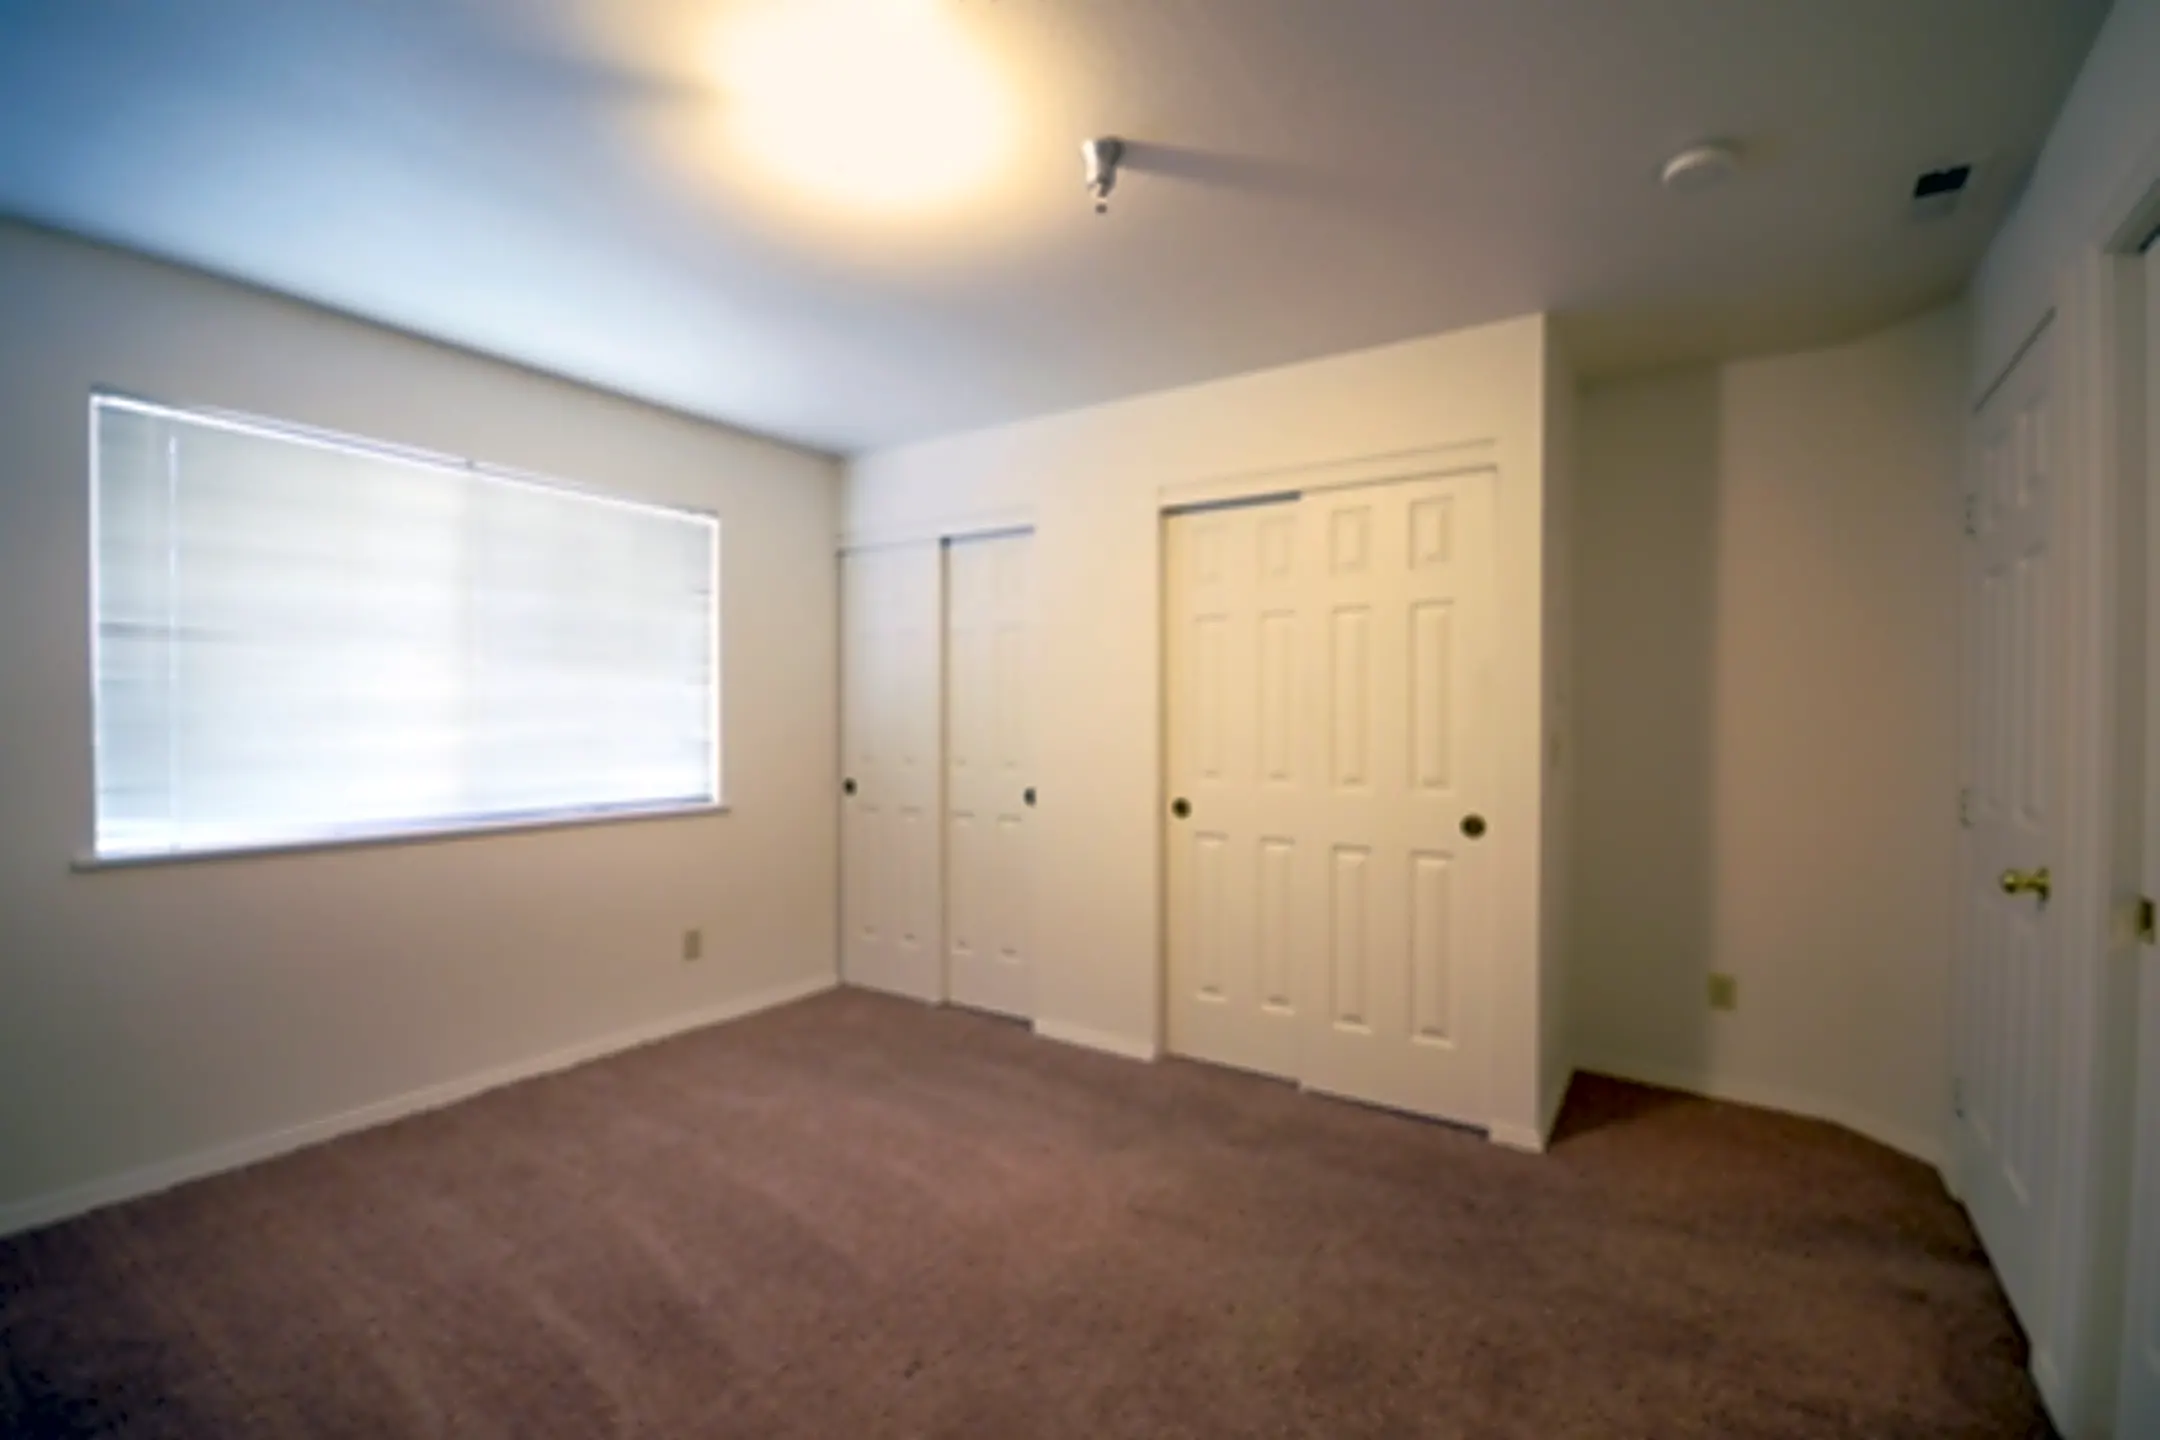 Bedroom - Orchard Place Apartments - Nampa, ID